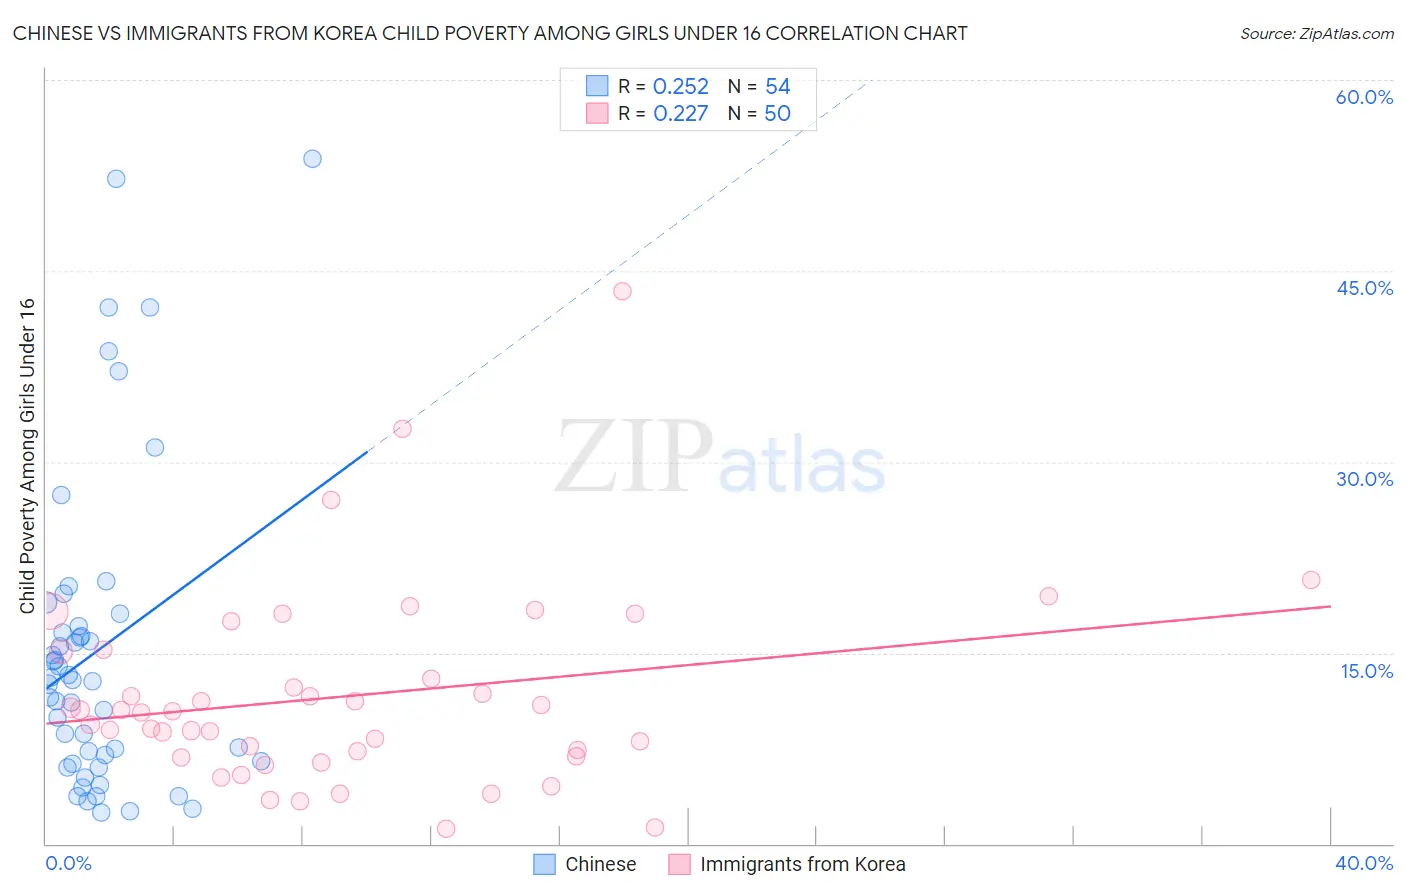 Chinese vs Immigrants from Korea Child Poverty Among Girls Under 16